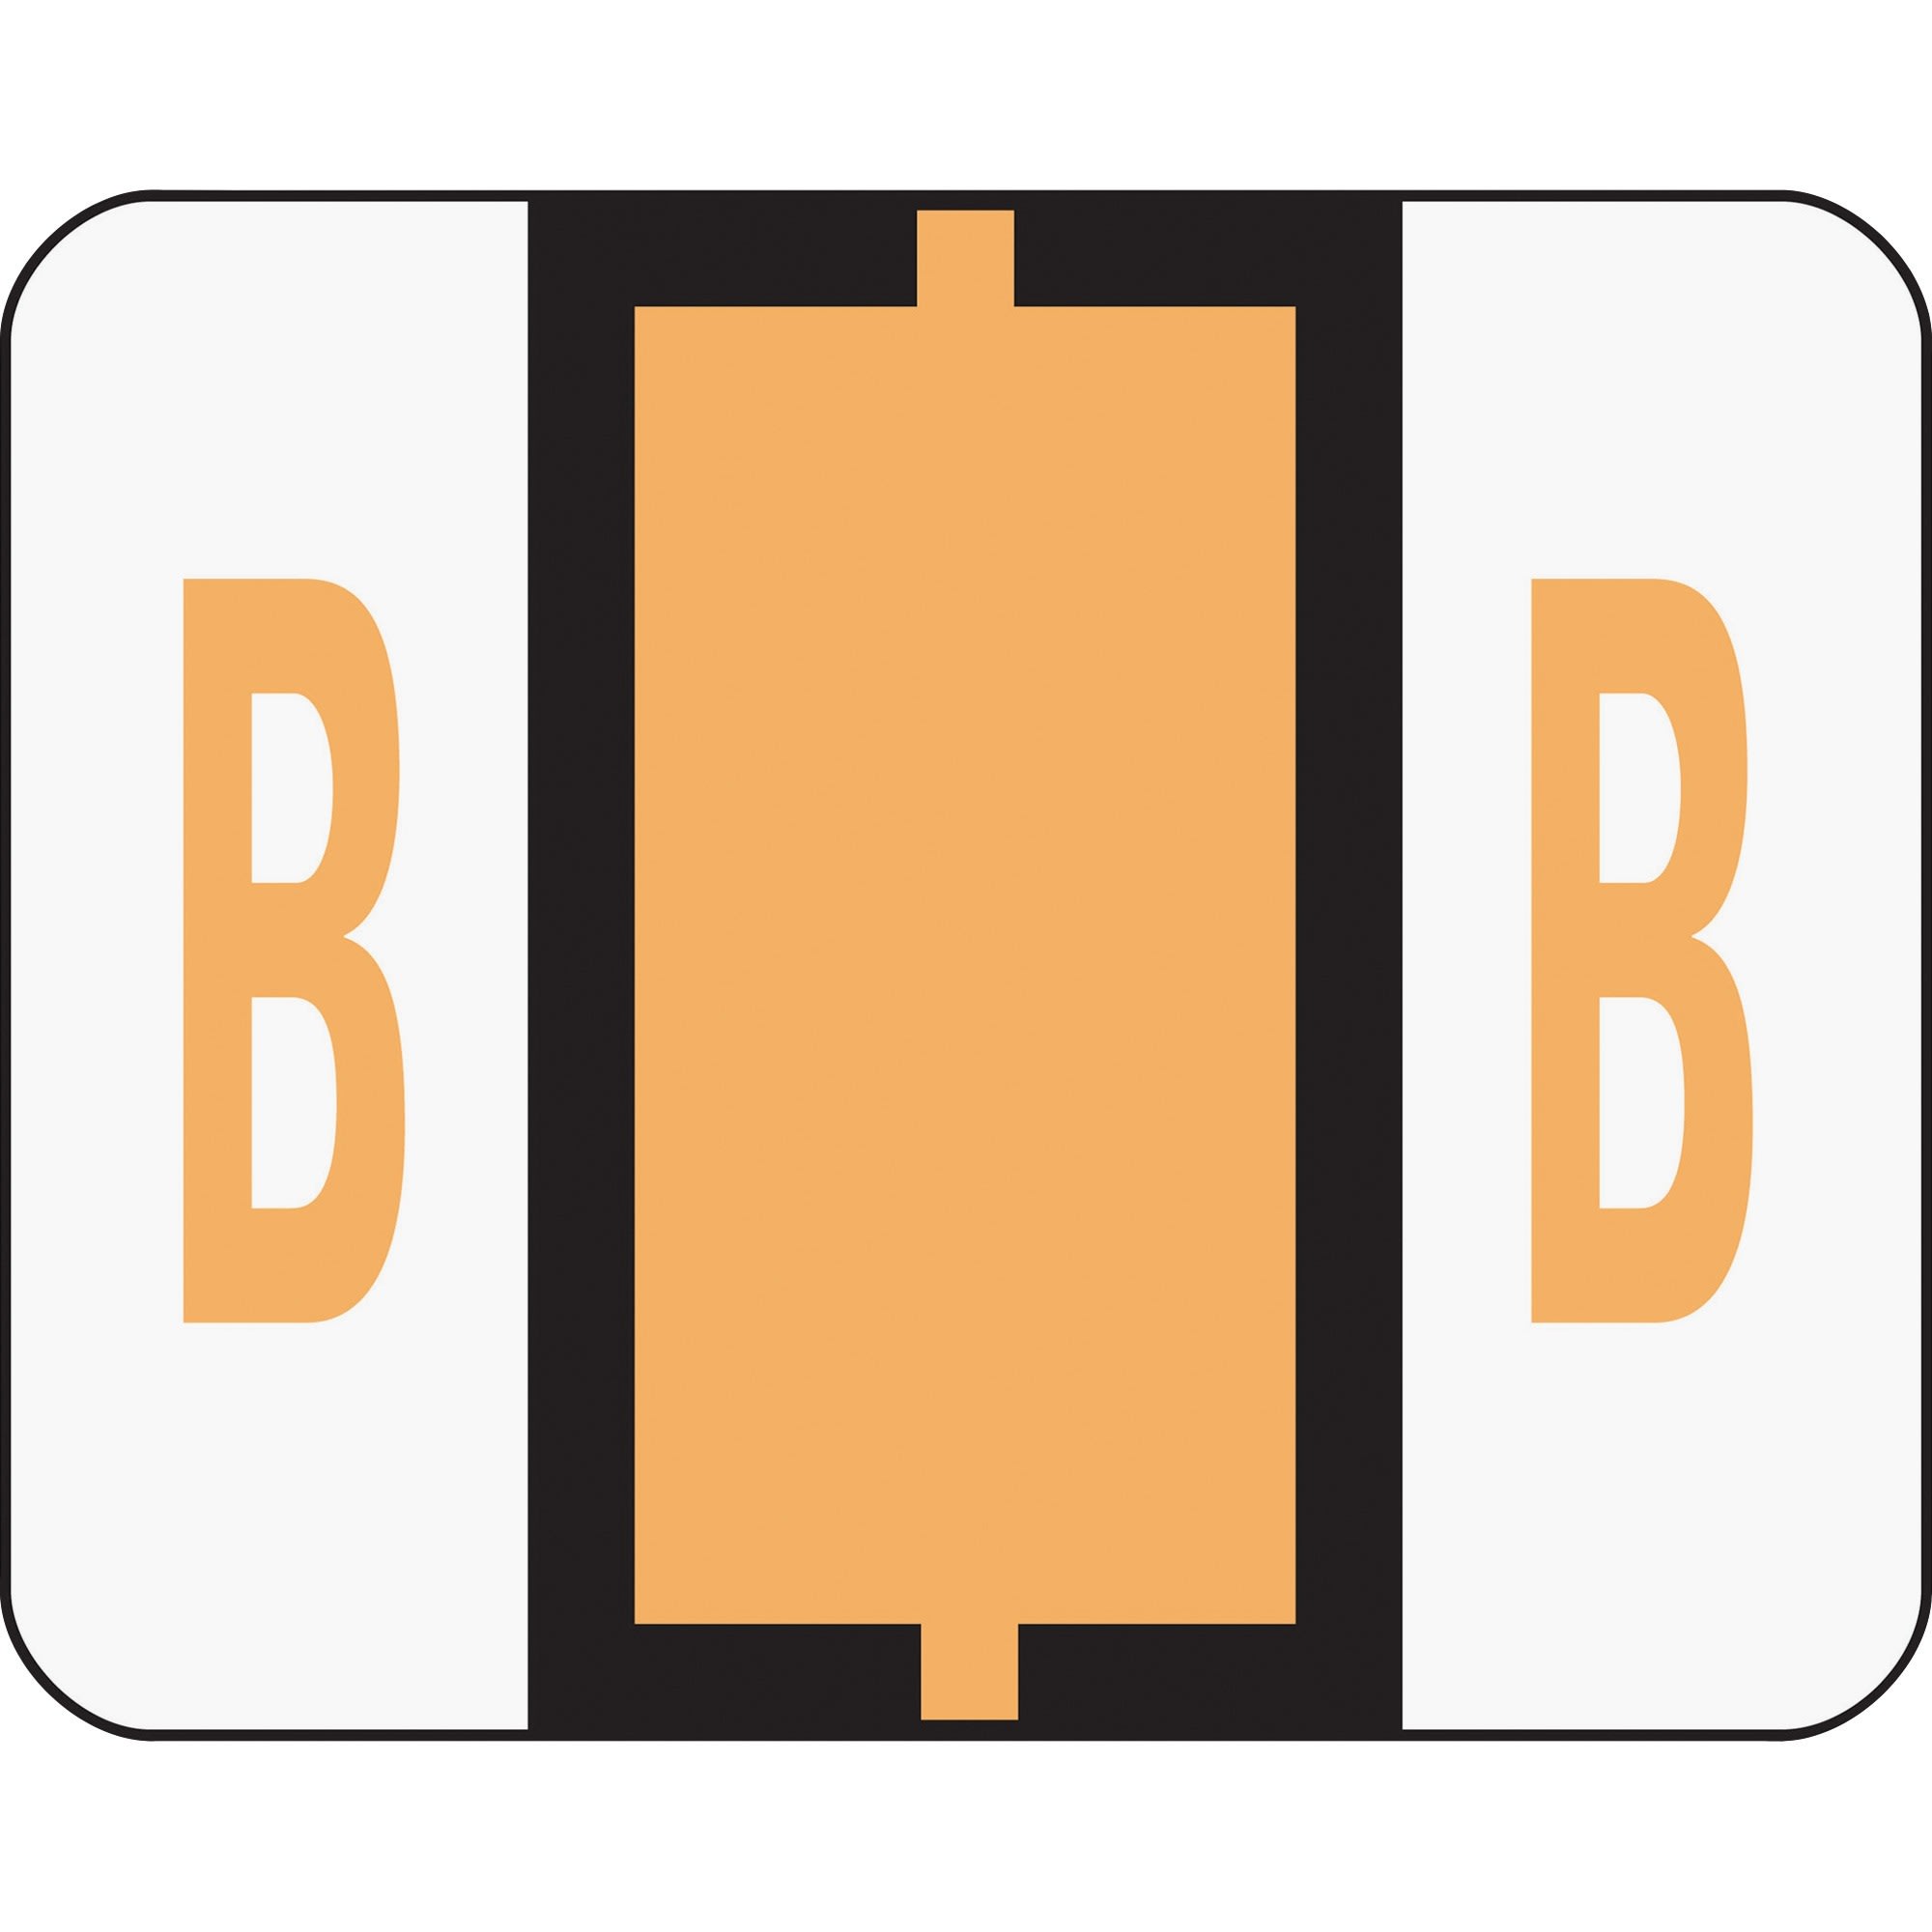 Smead 67072 A-Z Color-Coded Bar-Style End Tab Labels, Letter B, Light Orange, 500/Roll - image 3 of 3